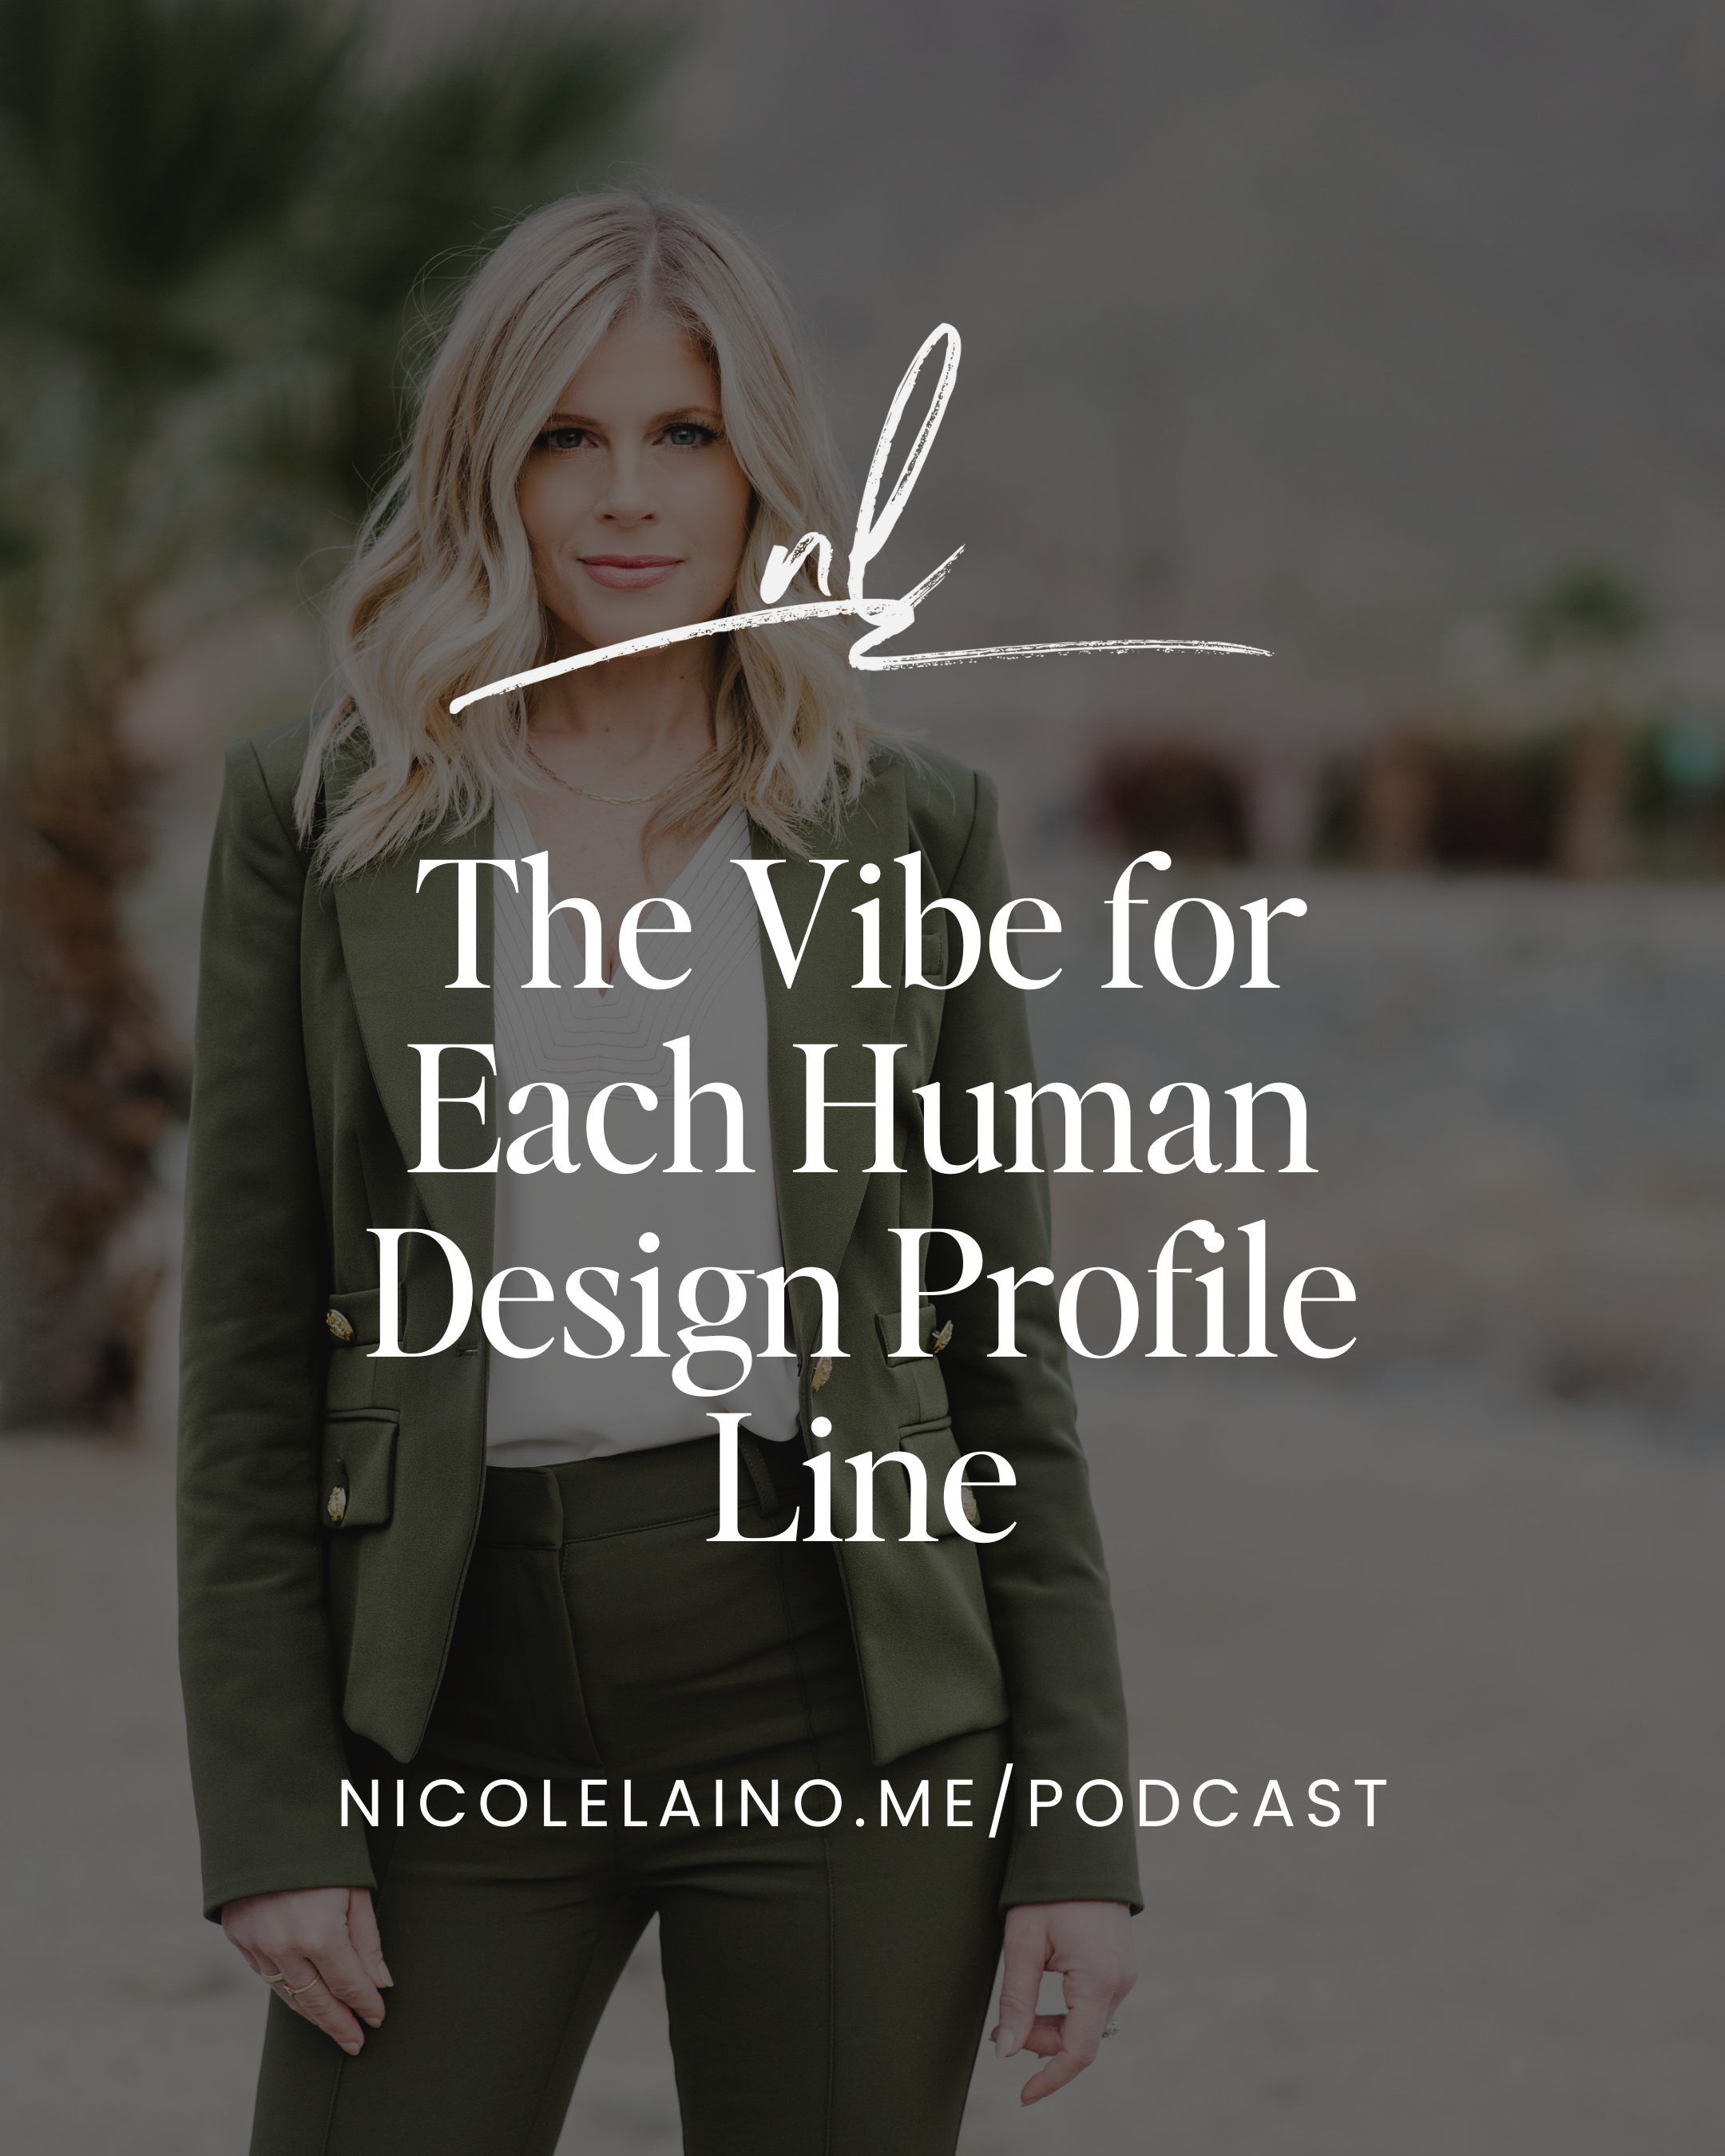 The Vibe for Each Human Design Profile Line